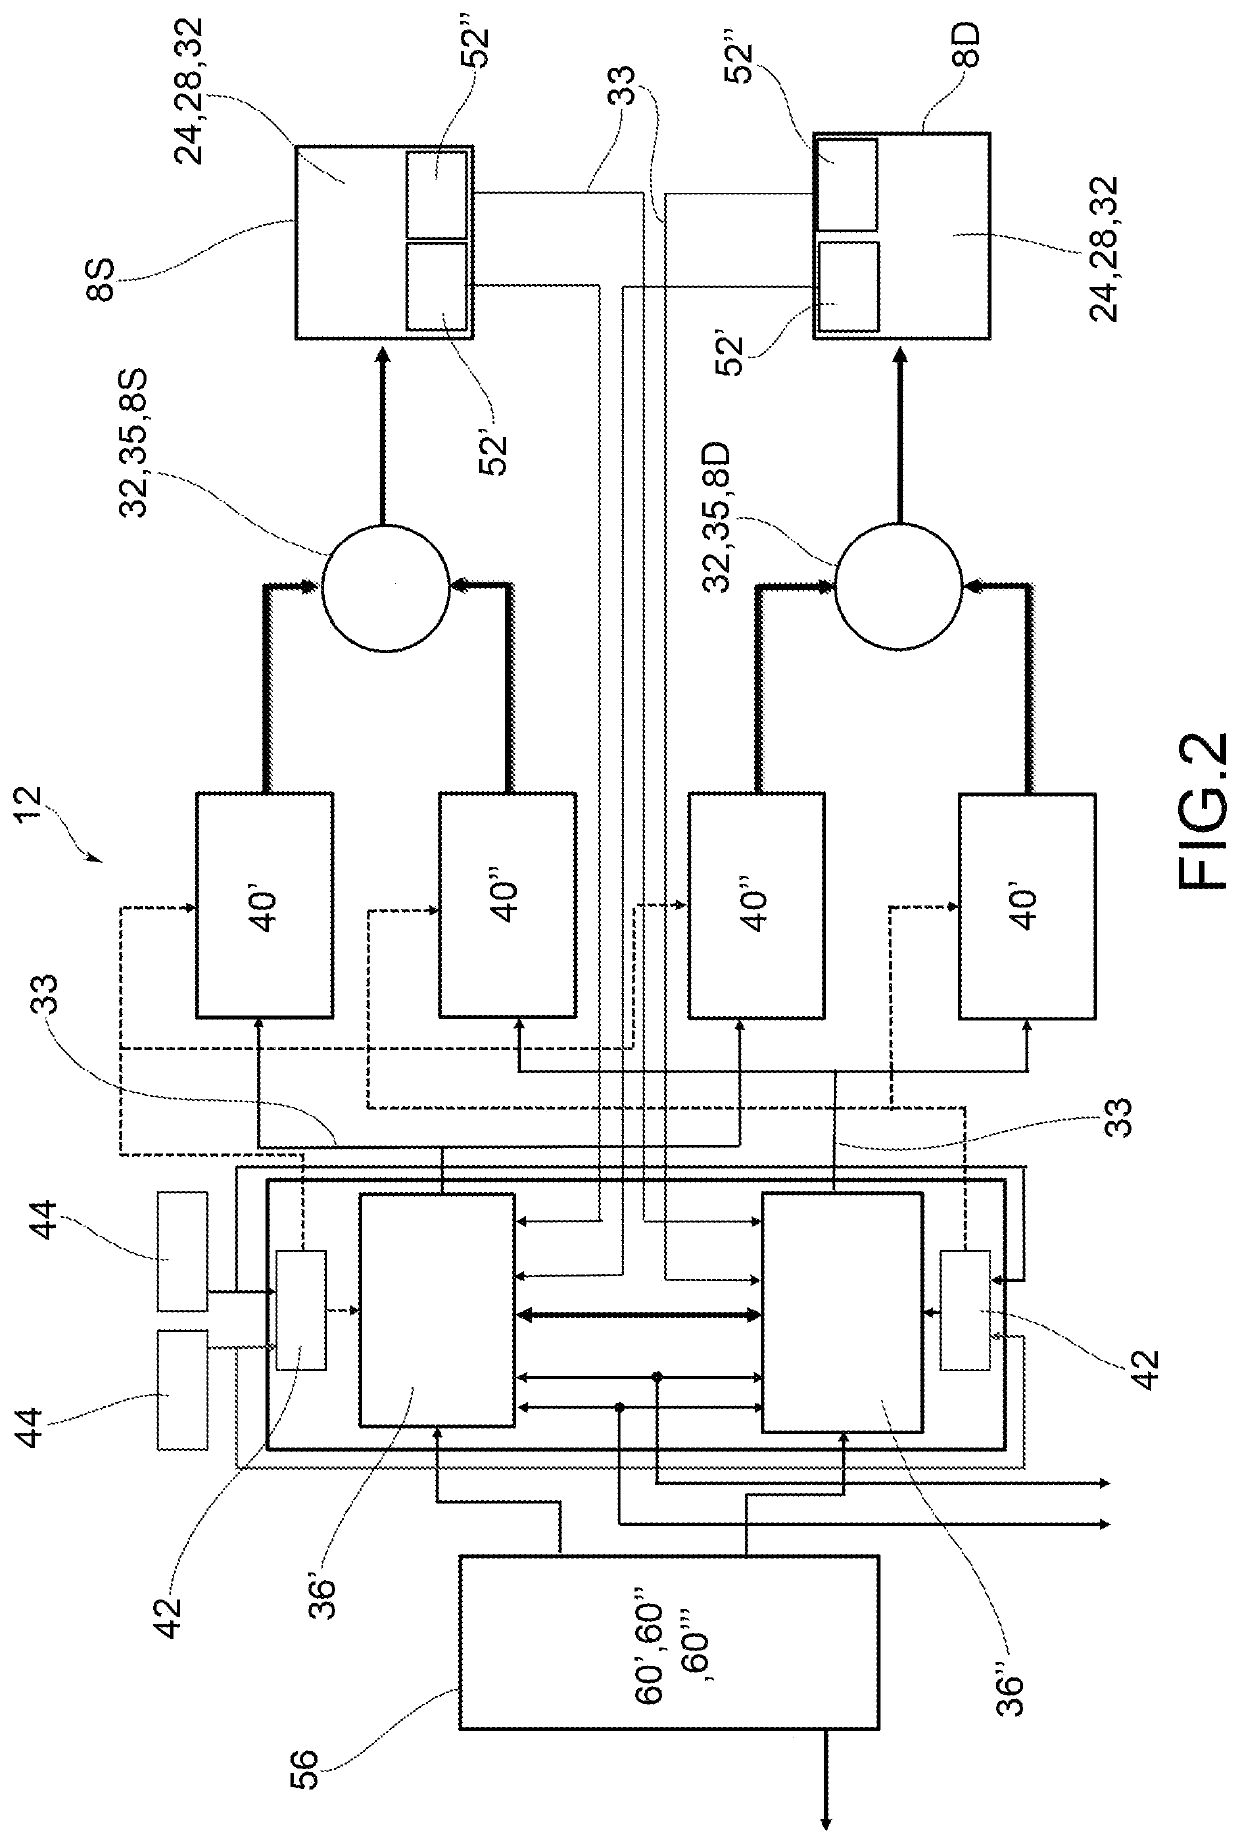 Brake by wire braking system for vehicles, provided with electric actuation and electric back-up